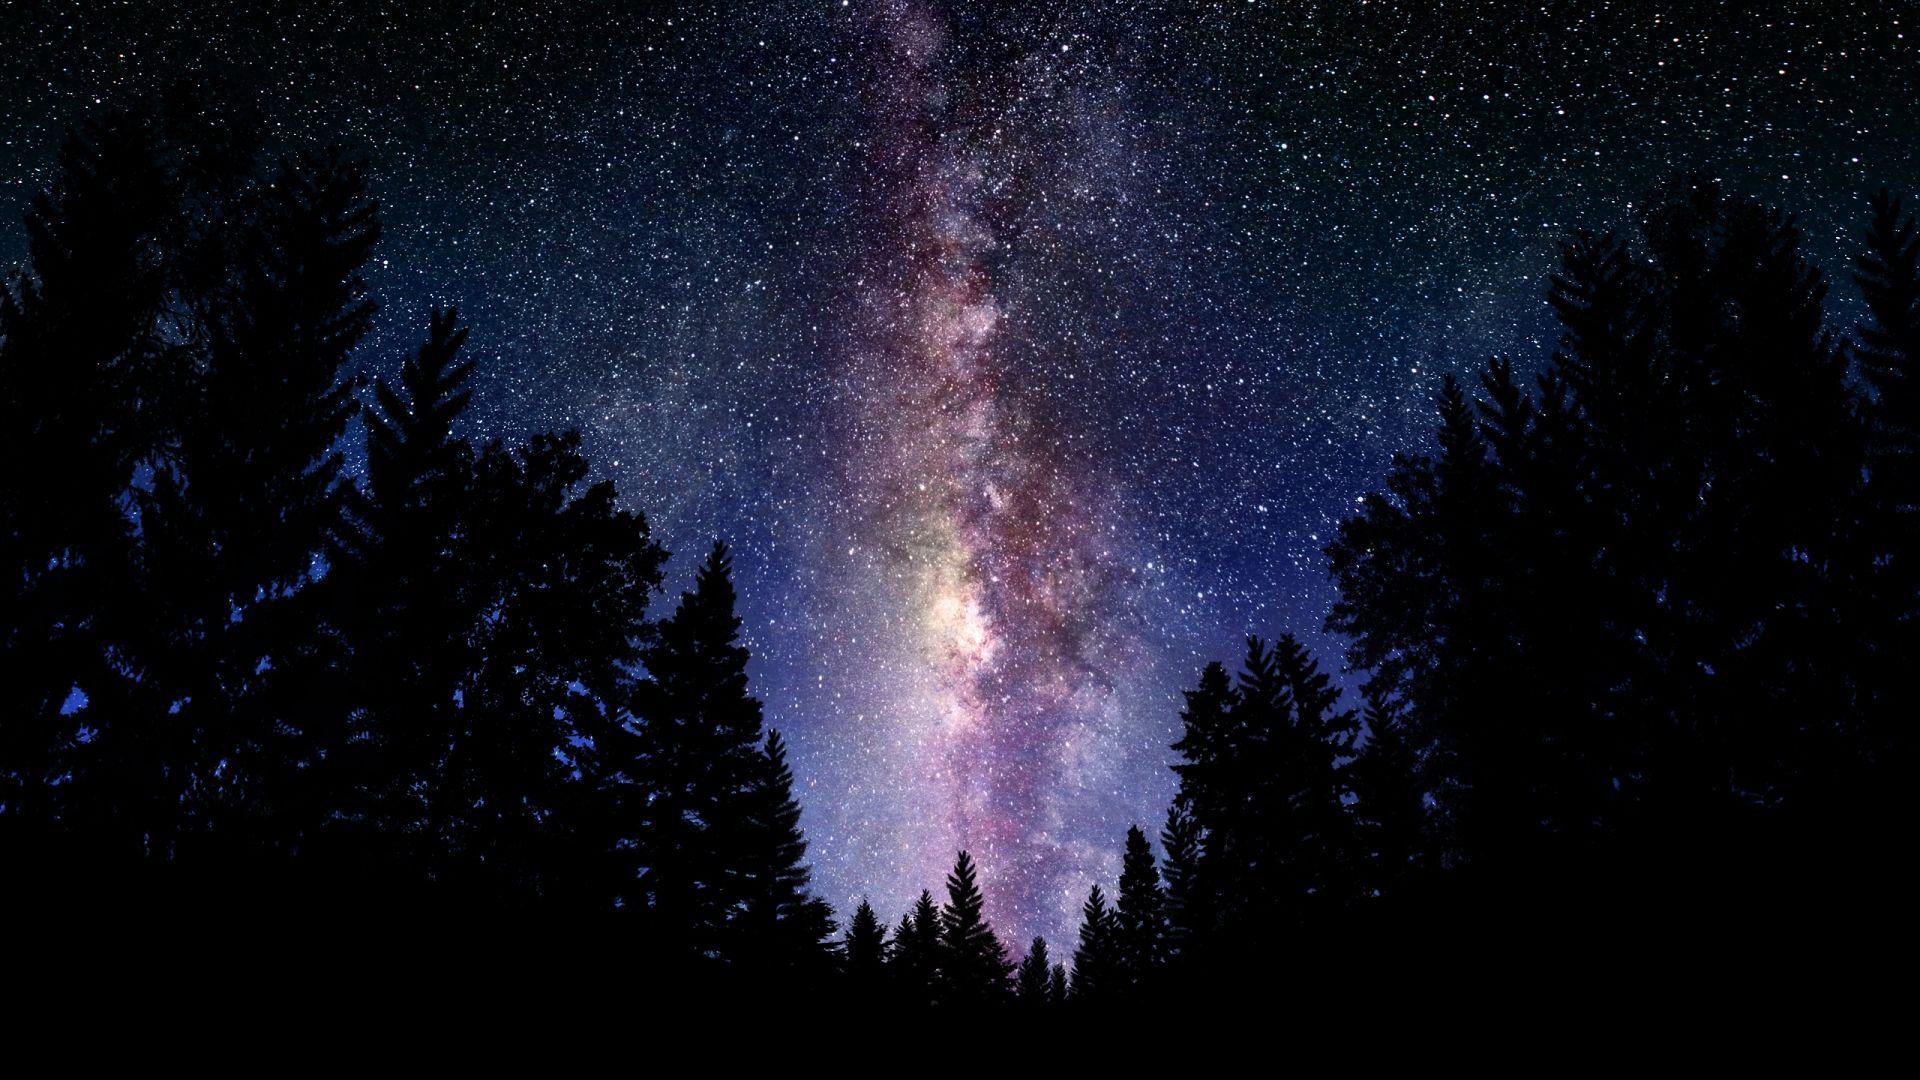 Forest Night Sky Wallpapers - Top Free Forest Night Sky Backgrounds